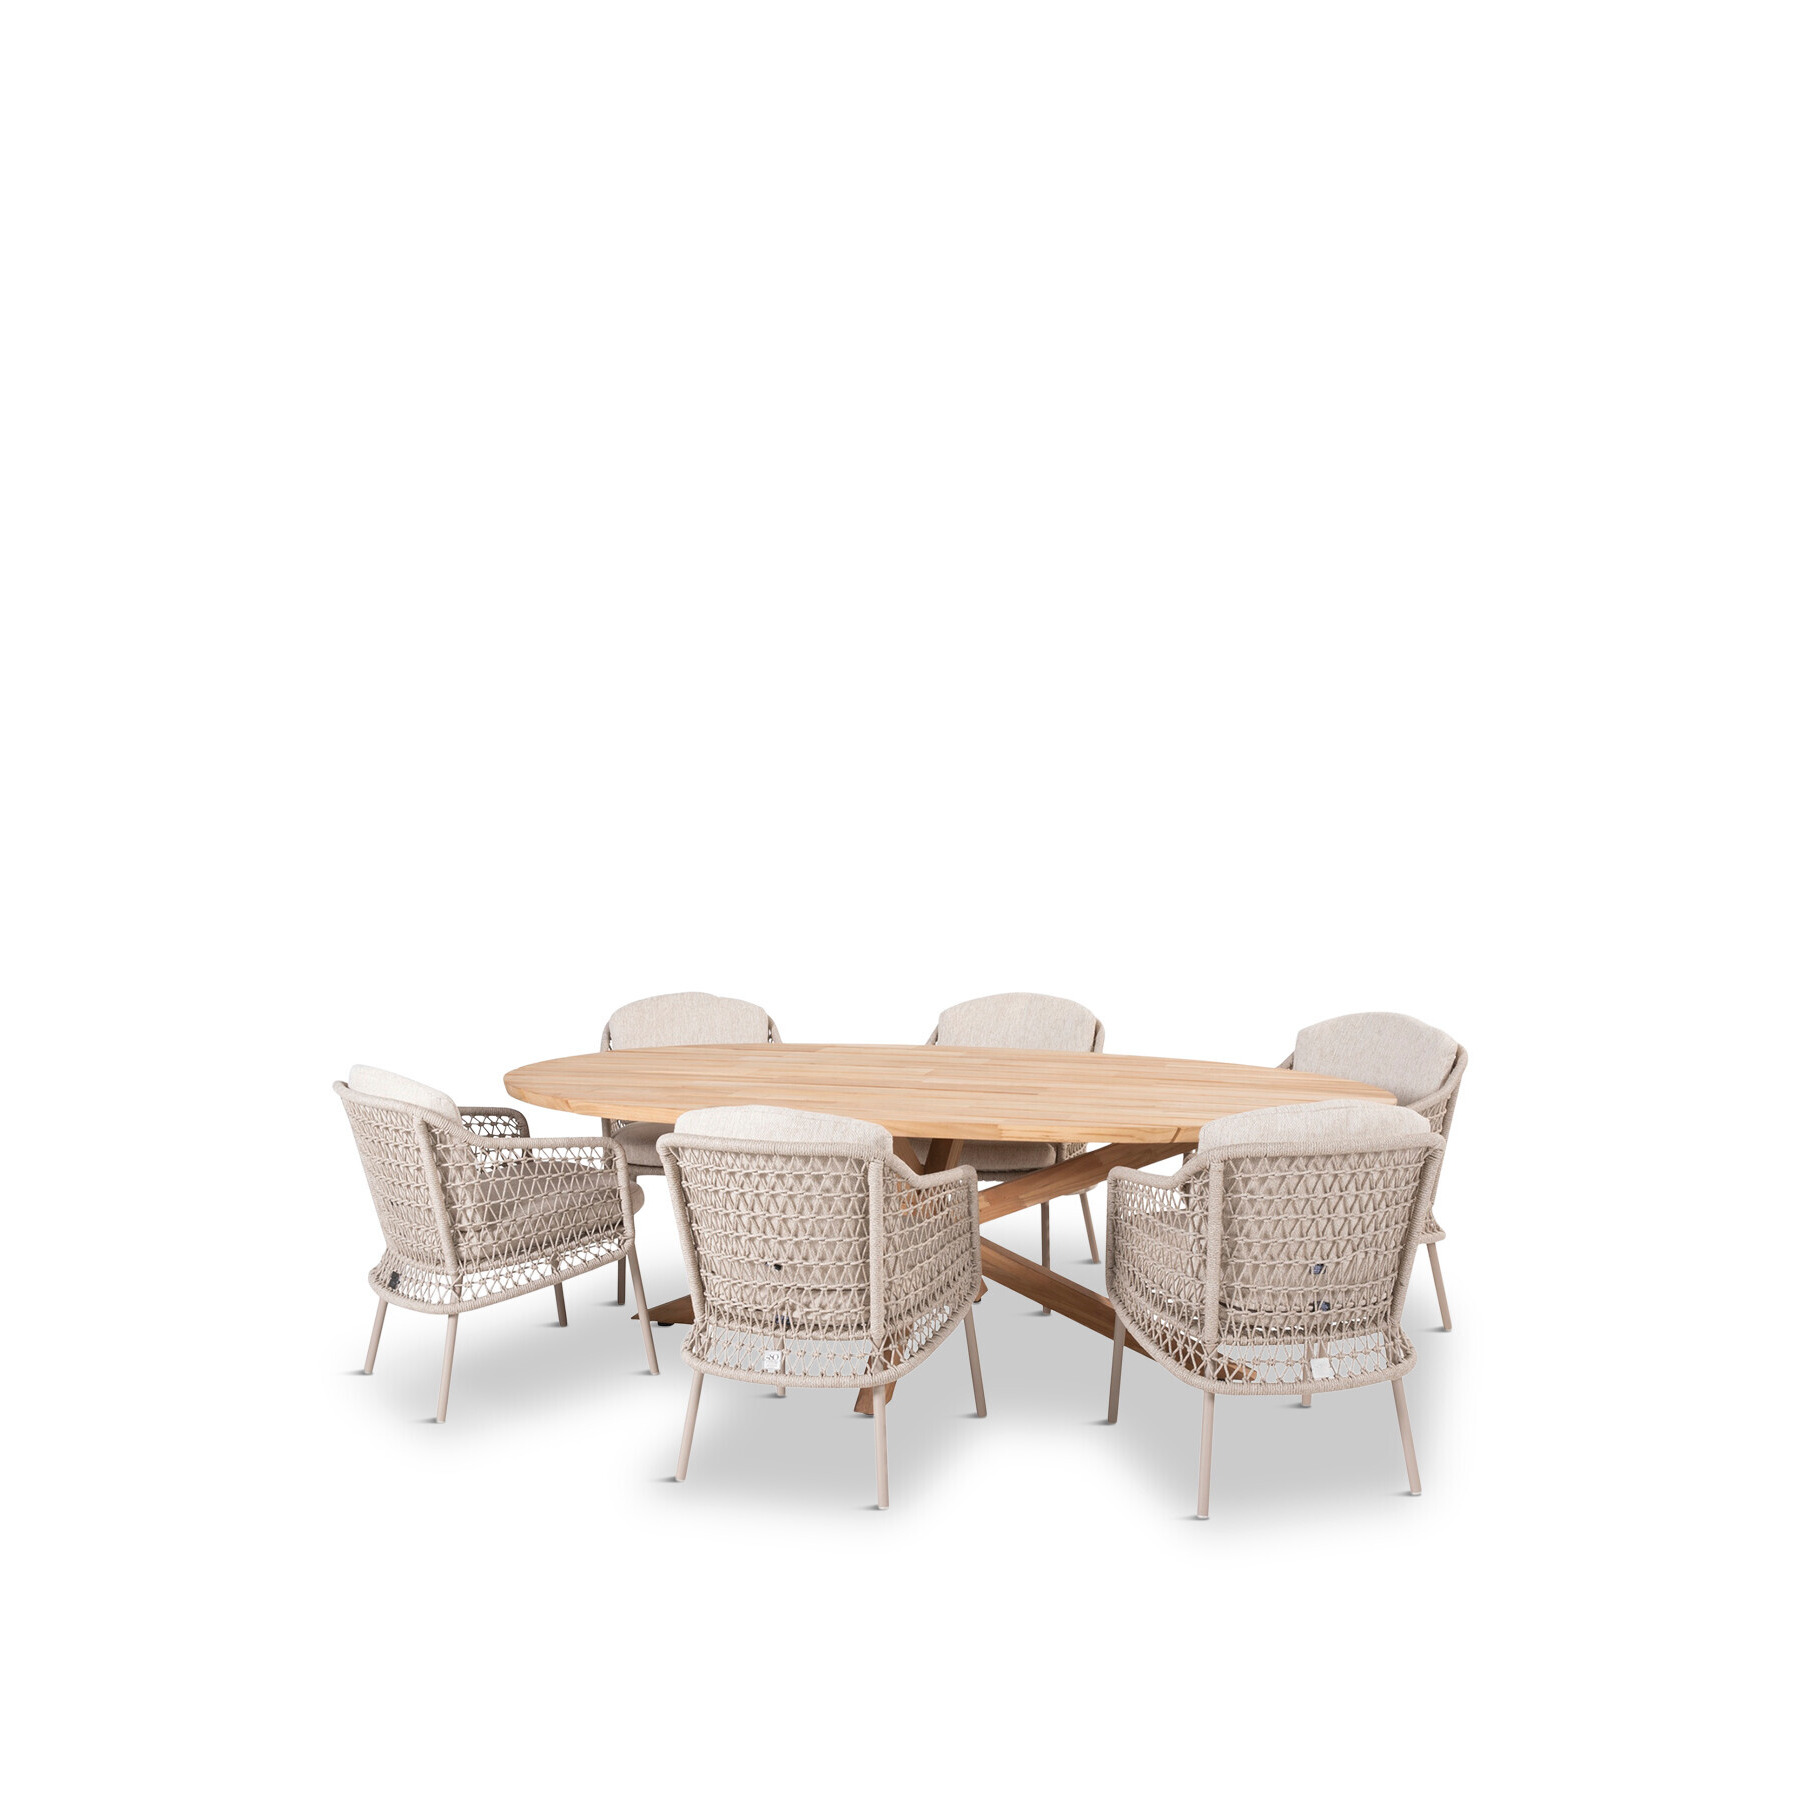 4 Seasons Outdoor Puccini 6 Seater Dining Set with Oval Dining Table & 6 Chairs Natural - image 1